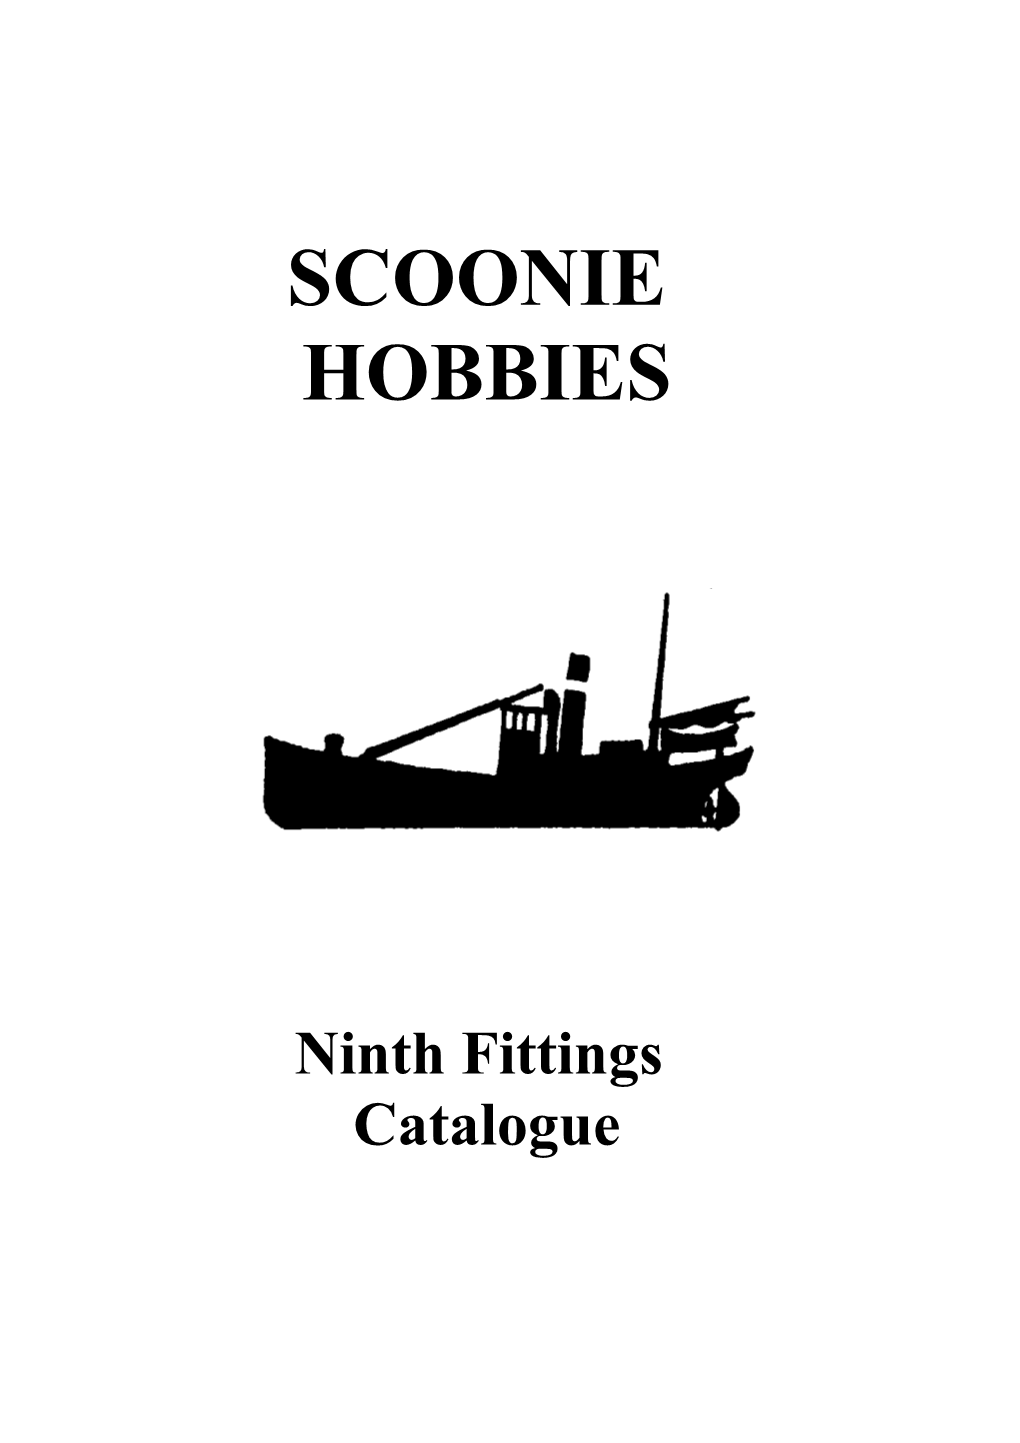 Scoonie Hobbies First Catalogue